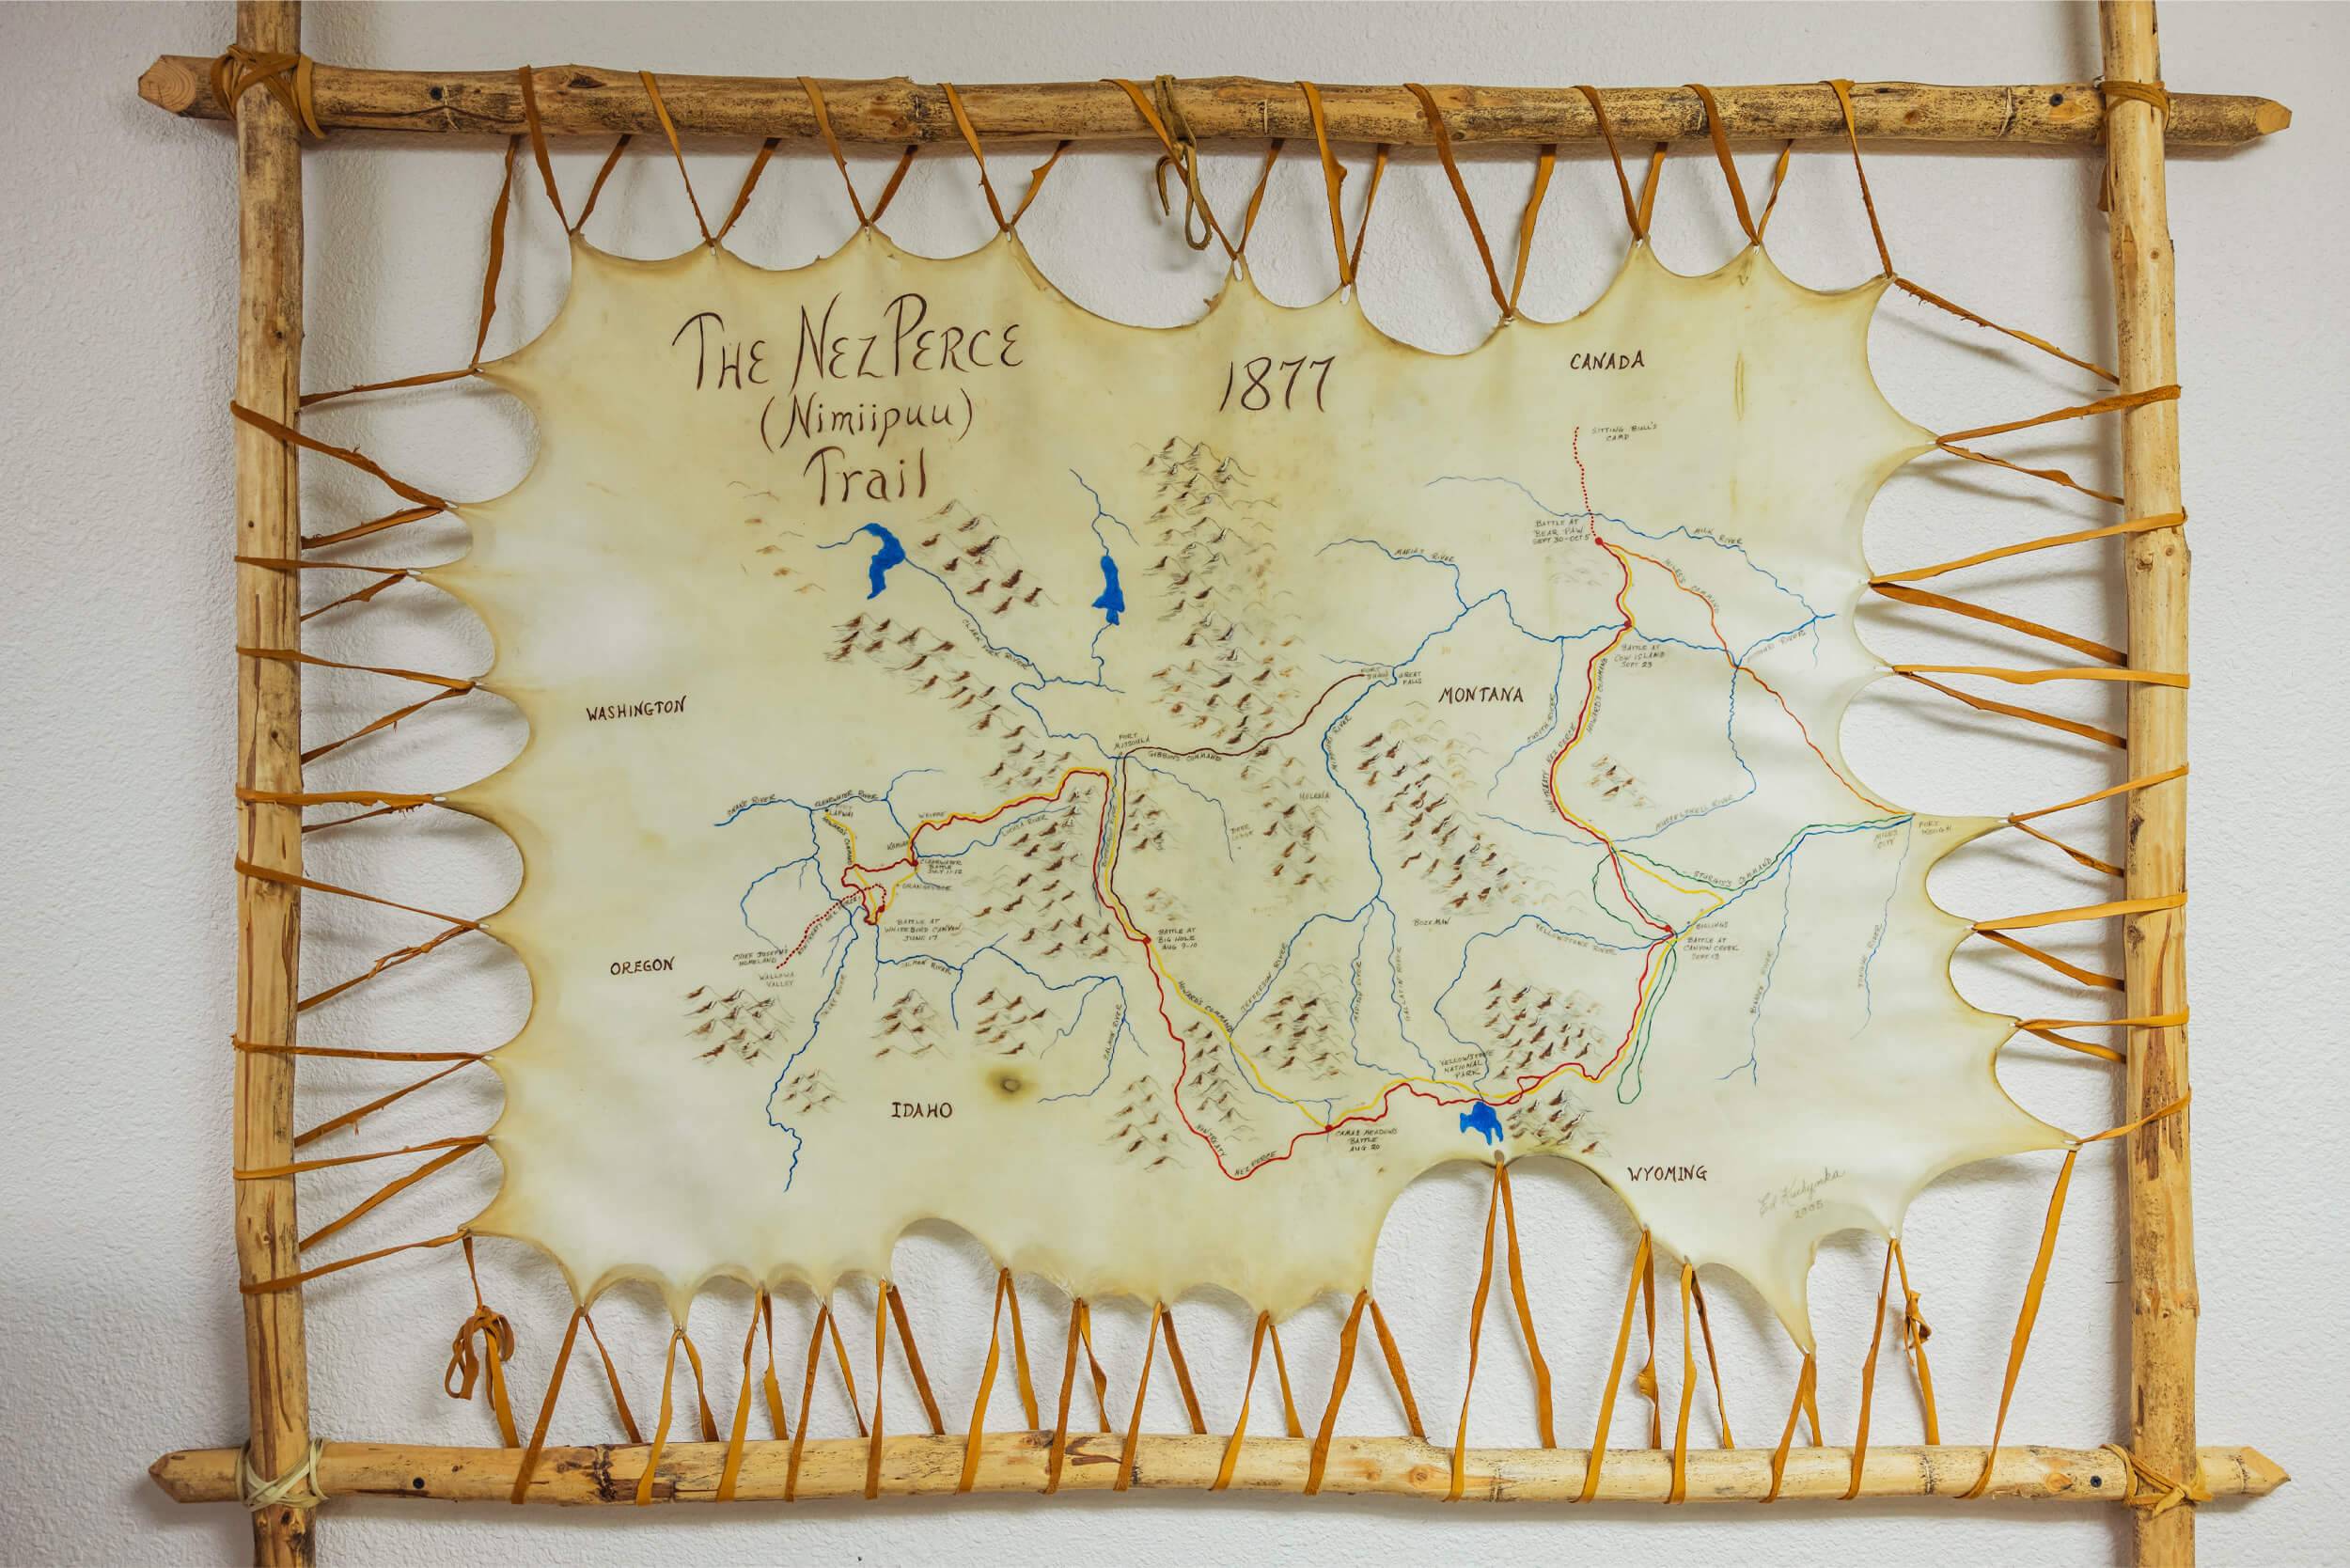 A map of the Nez Perce Trail made from animal hide.